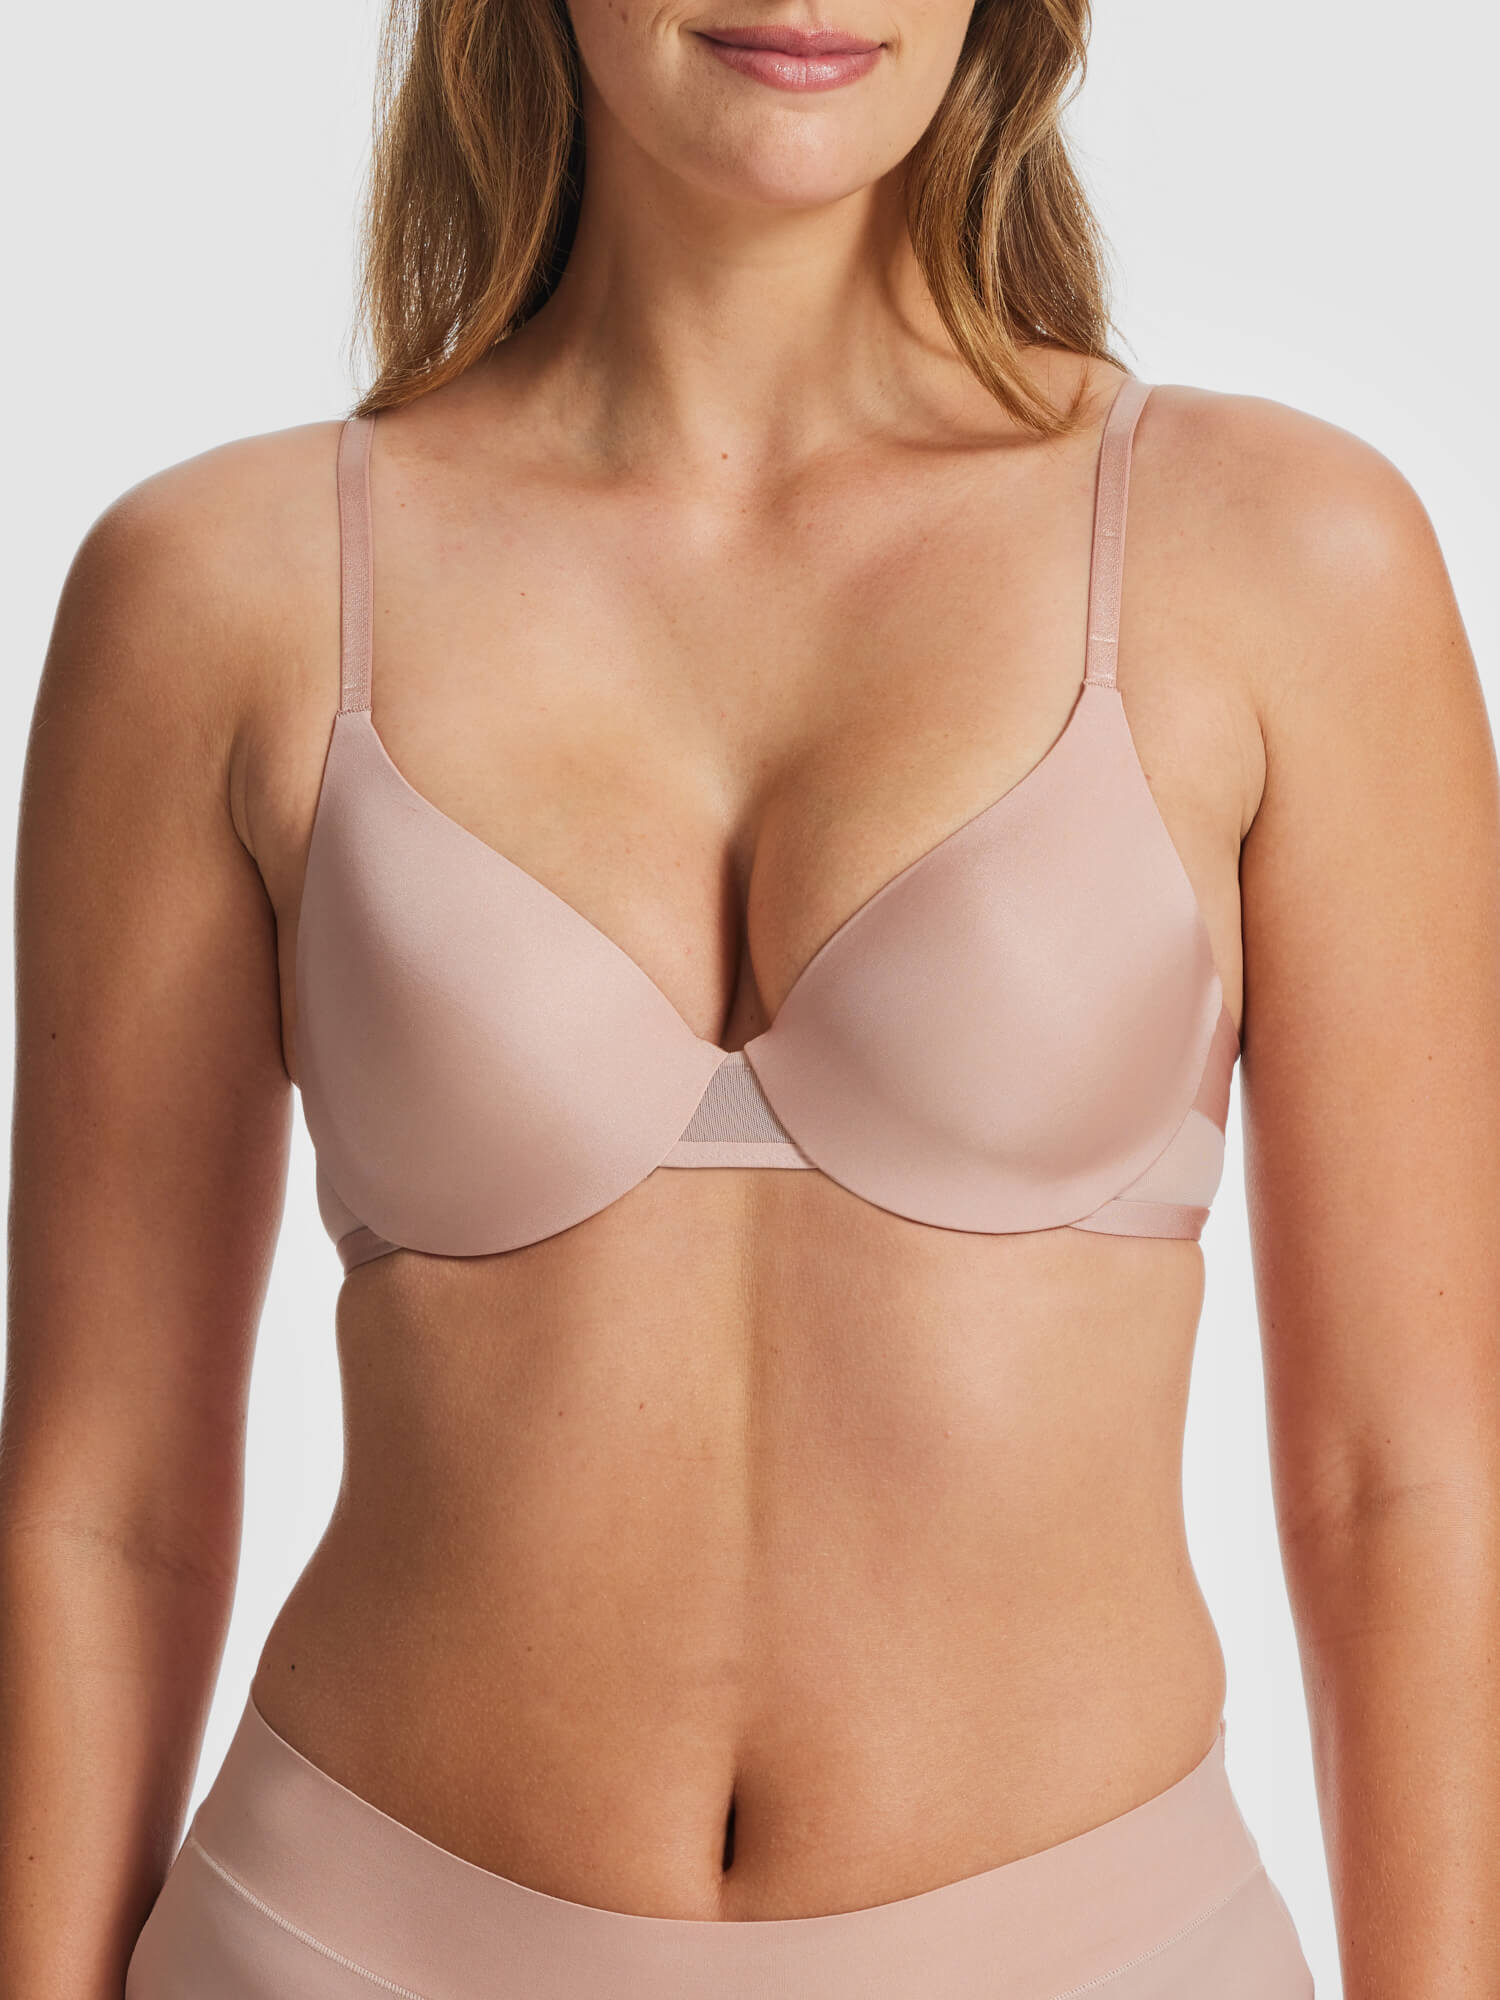 Supersoft Nude Full Coverage T-shirt Bra - Fine Lines Lingerie